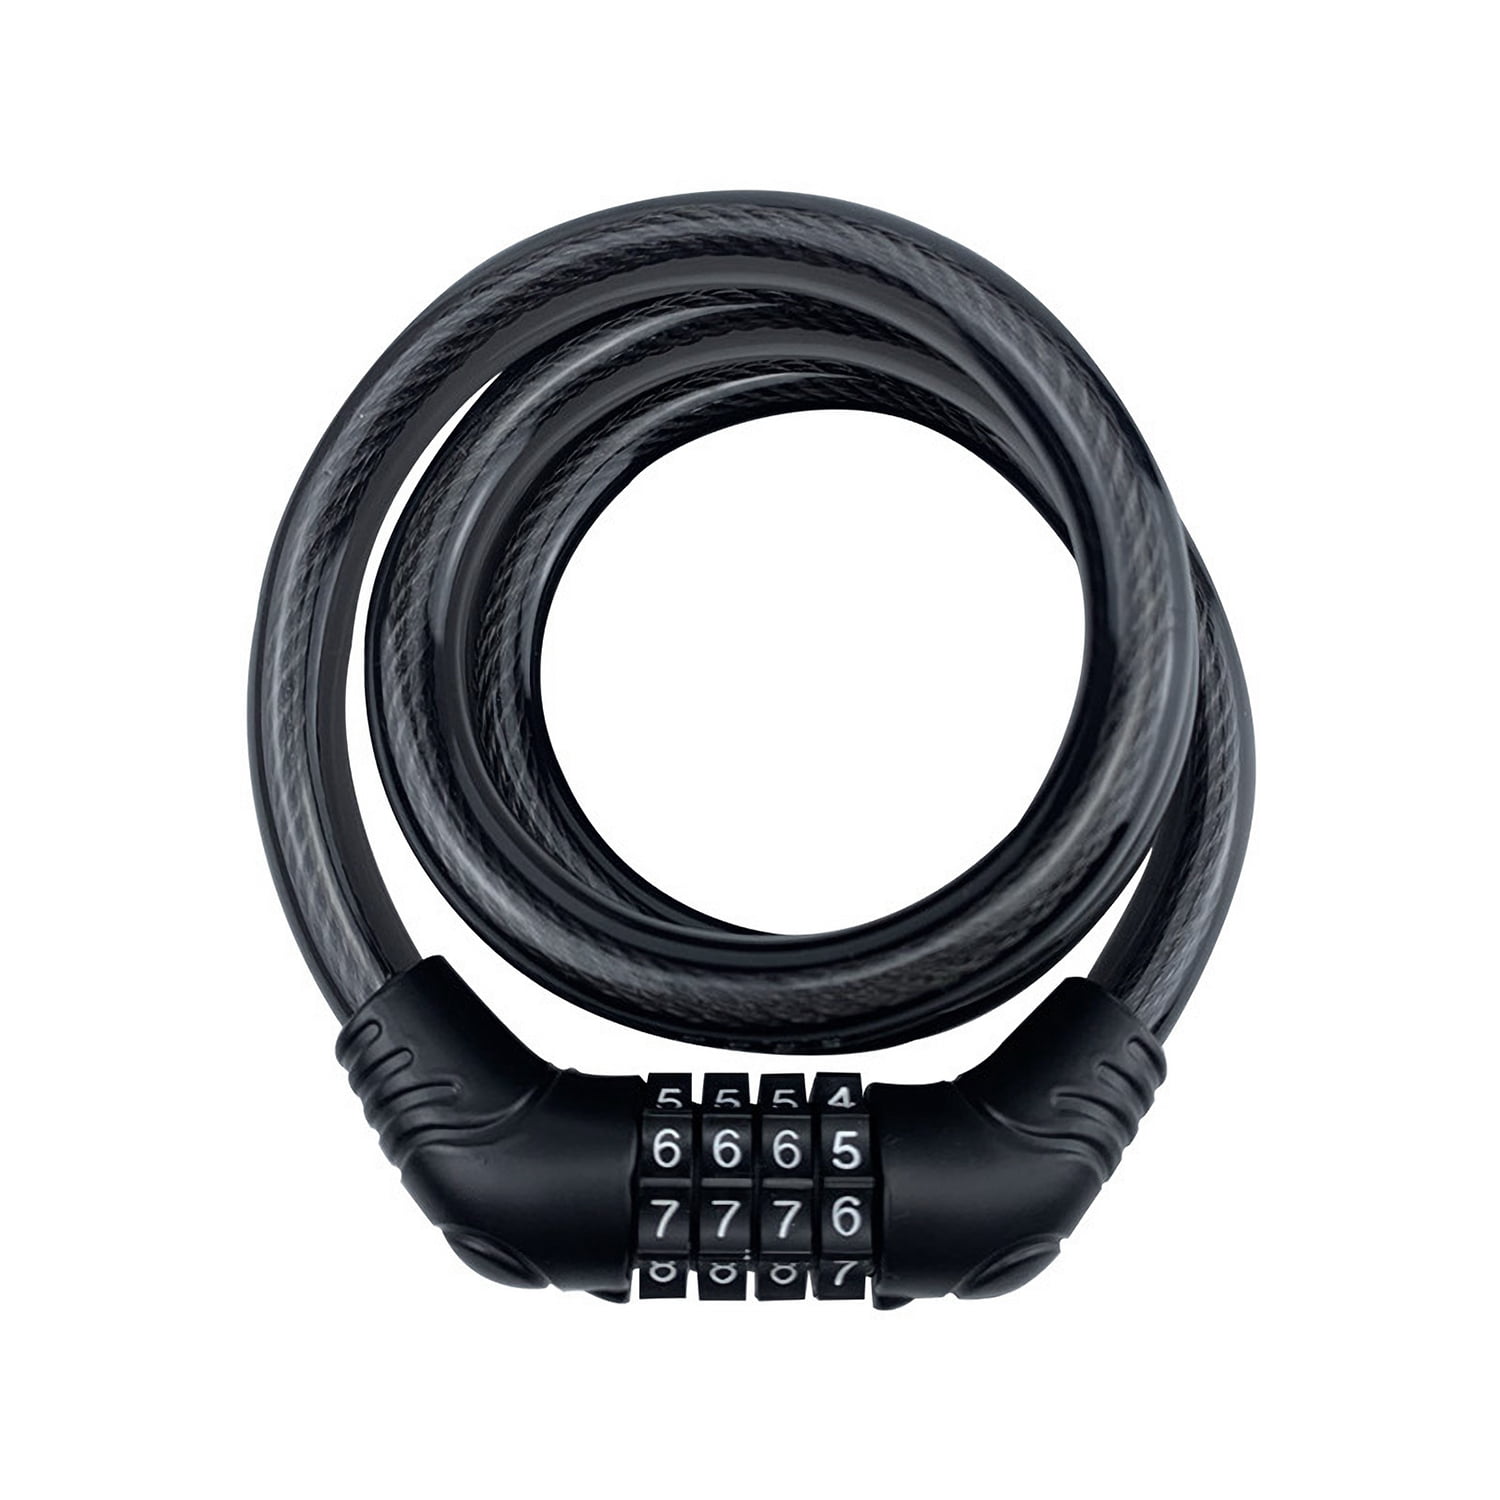 Heybike Lock Cable,4 Digit Resettable Combination Bicycle Cable Lock ...